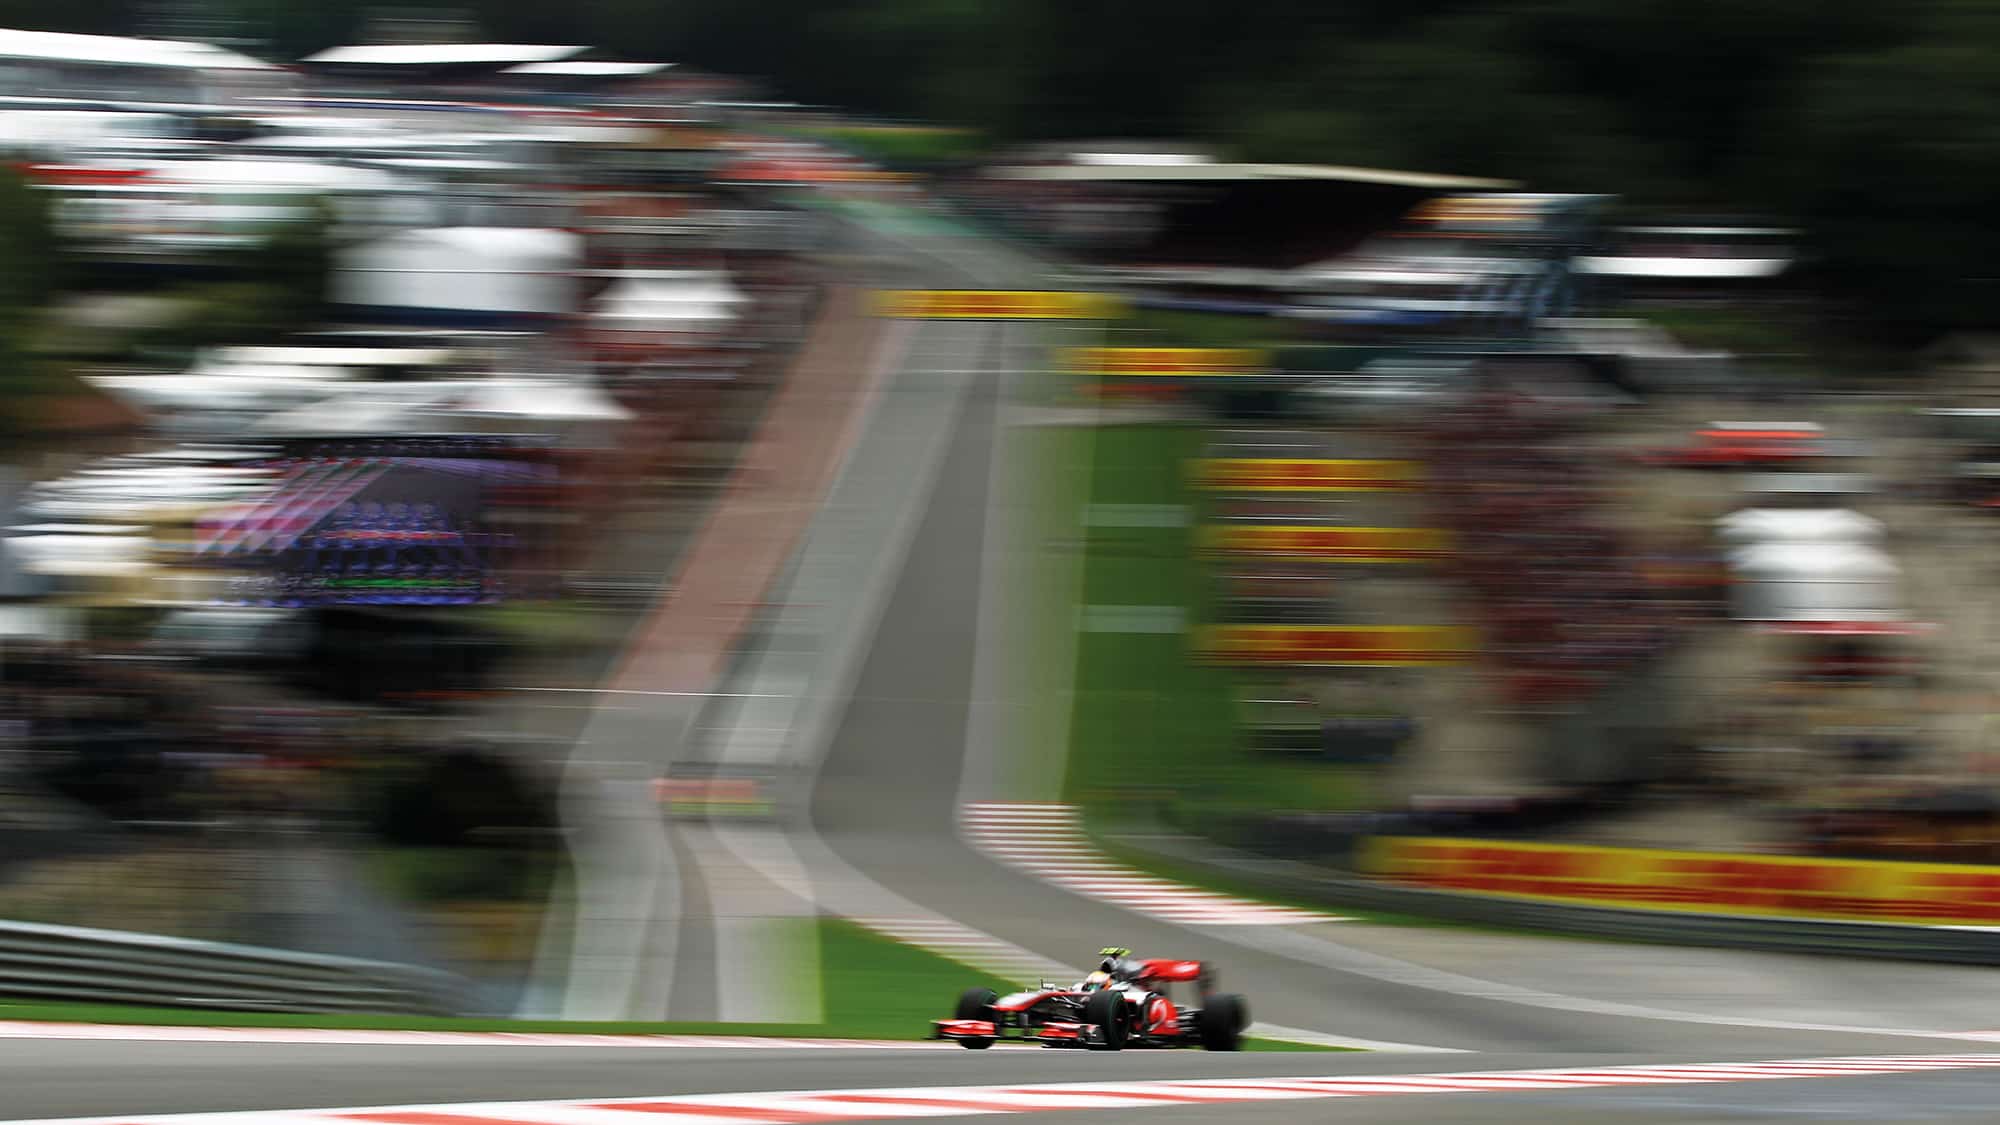 ewis Hamilton climbs up from Eau Rouge in the 2010 Belgian Grand Prix